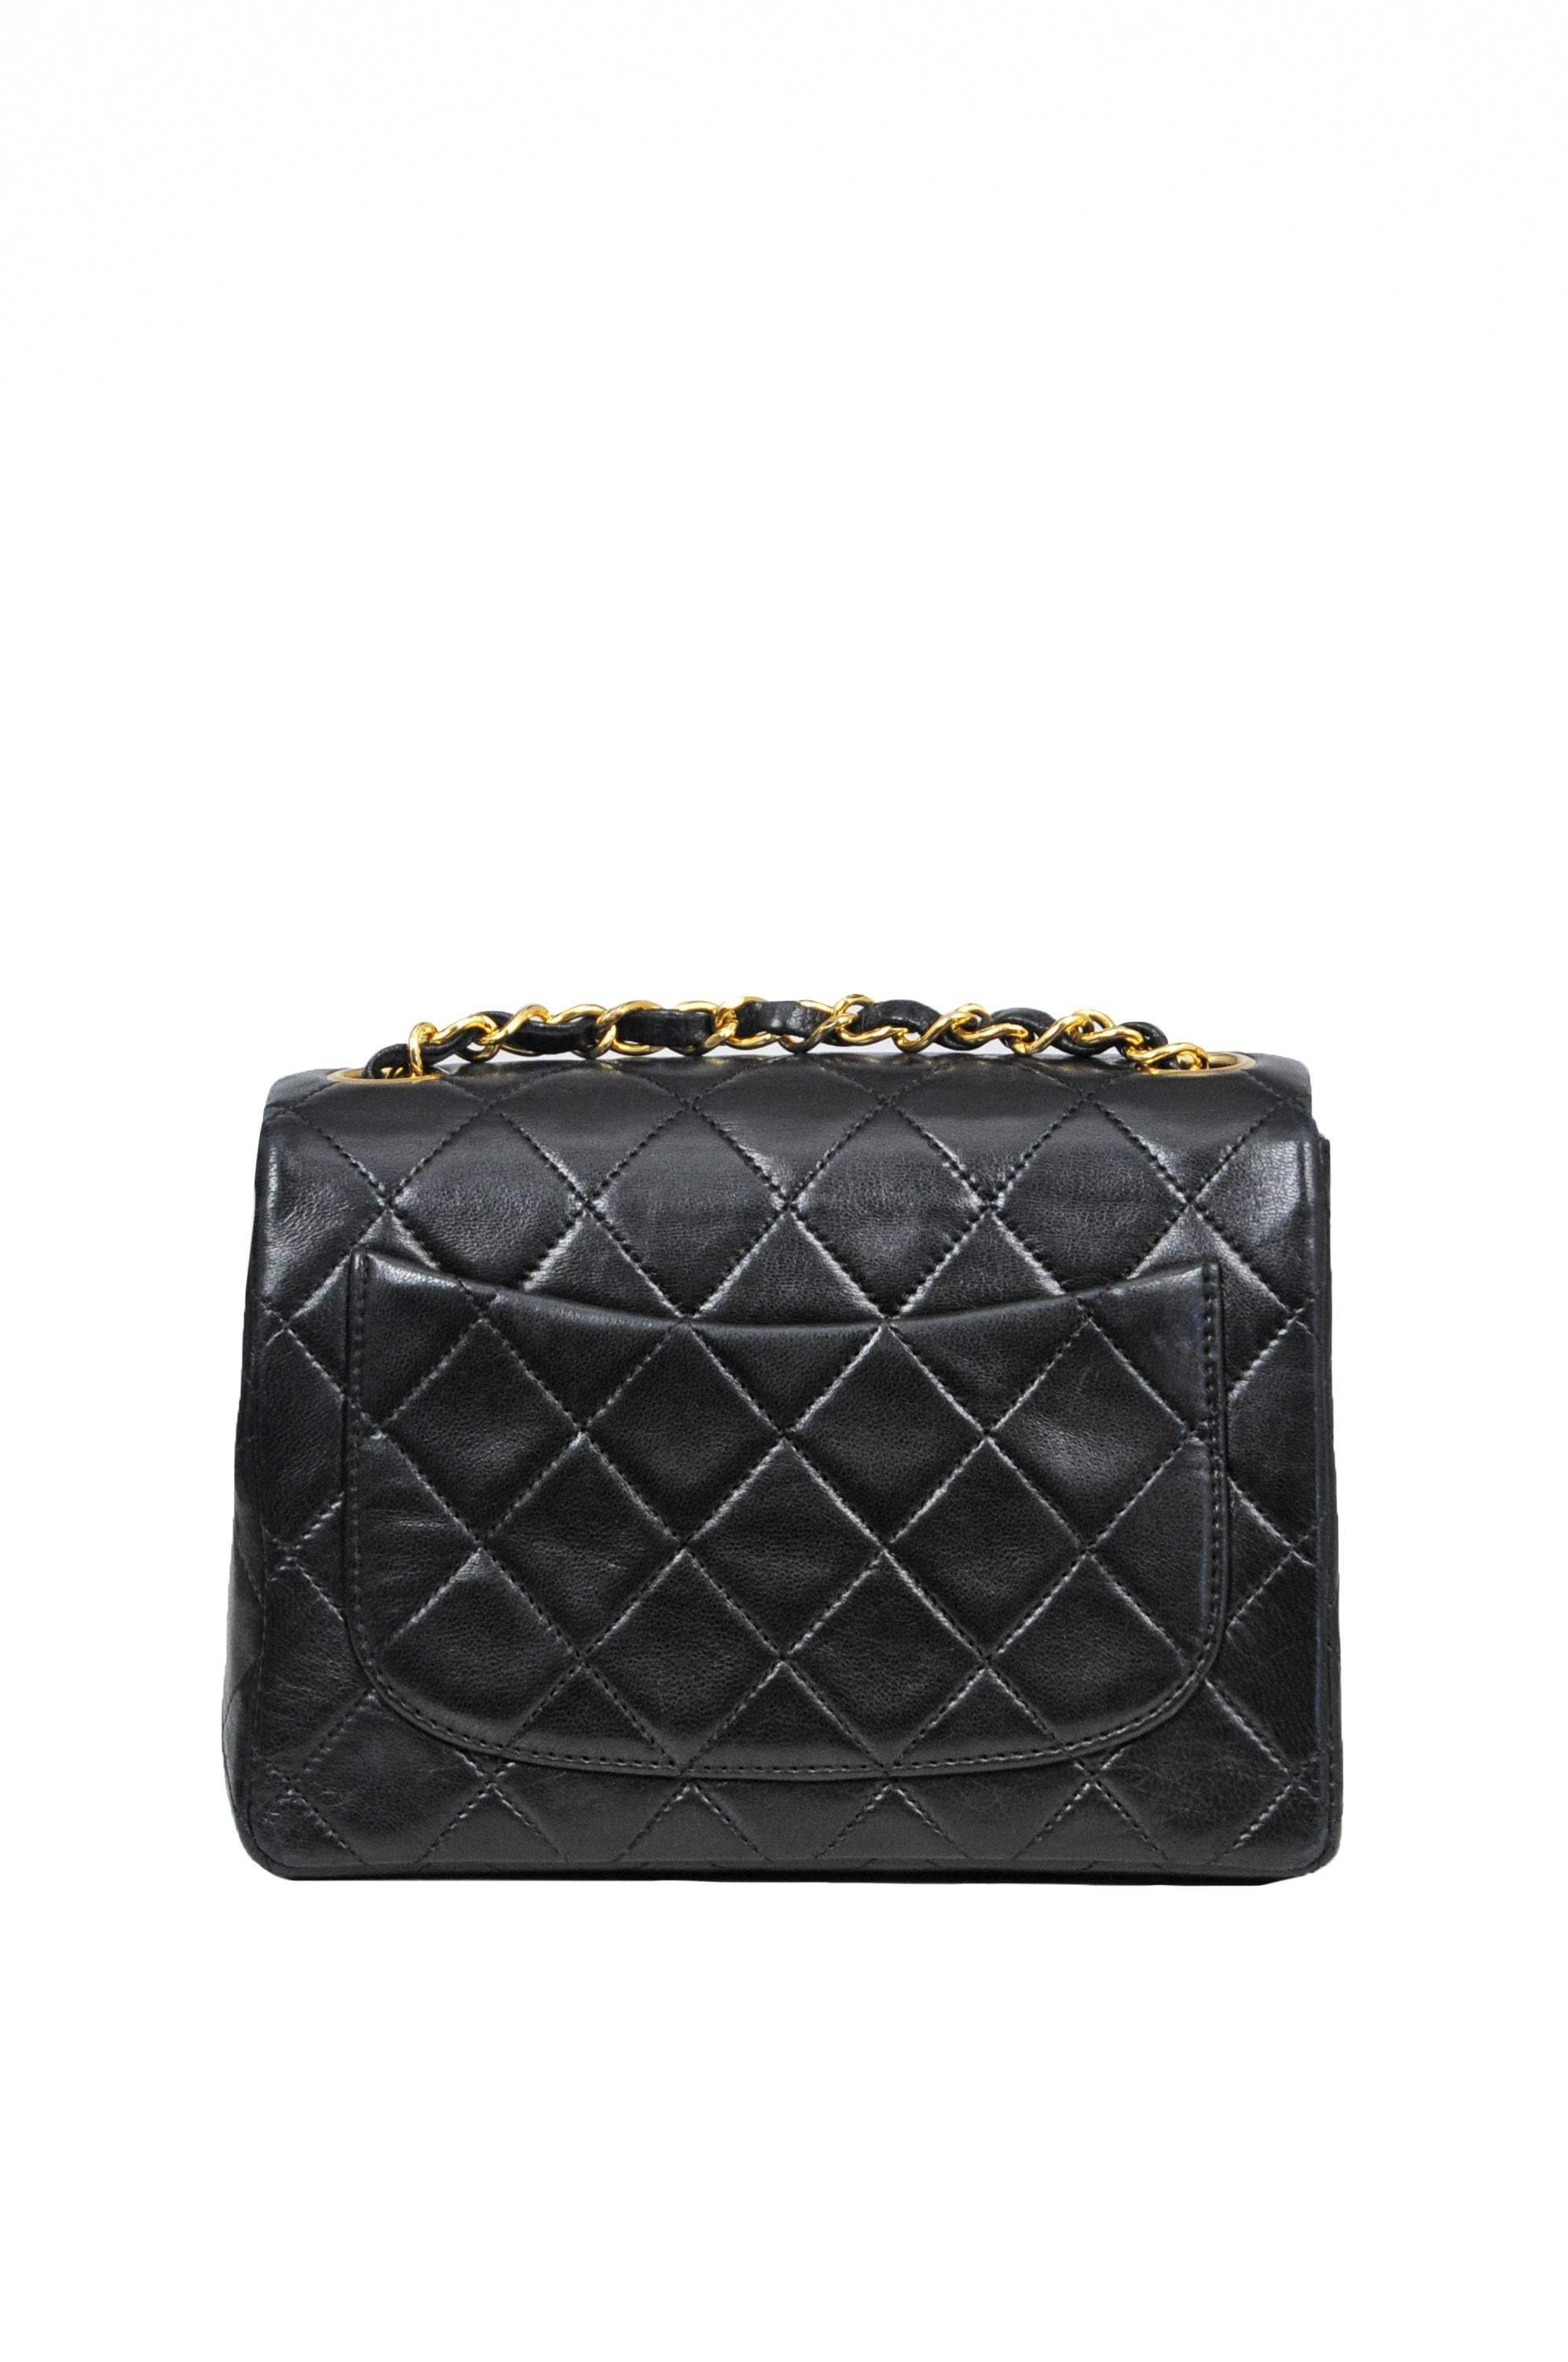 Vintage Chanel Classic mini bag in black quilted lambskin featuring burgundy leather interior lining, iconic leather and gold tone chain woven straps, a classic patch pocket at the back, one inner pocket, one inner hidden zip pocket, and a gold tone